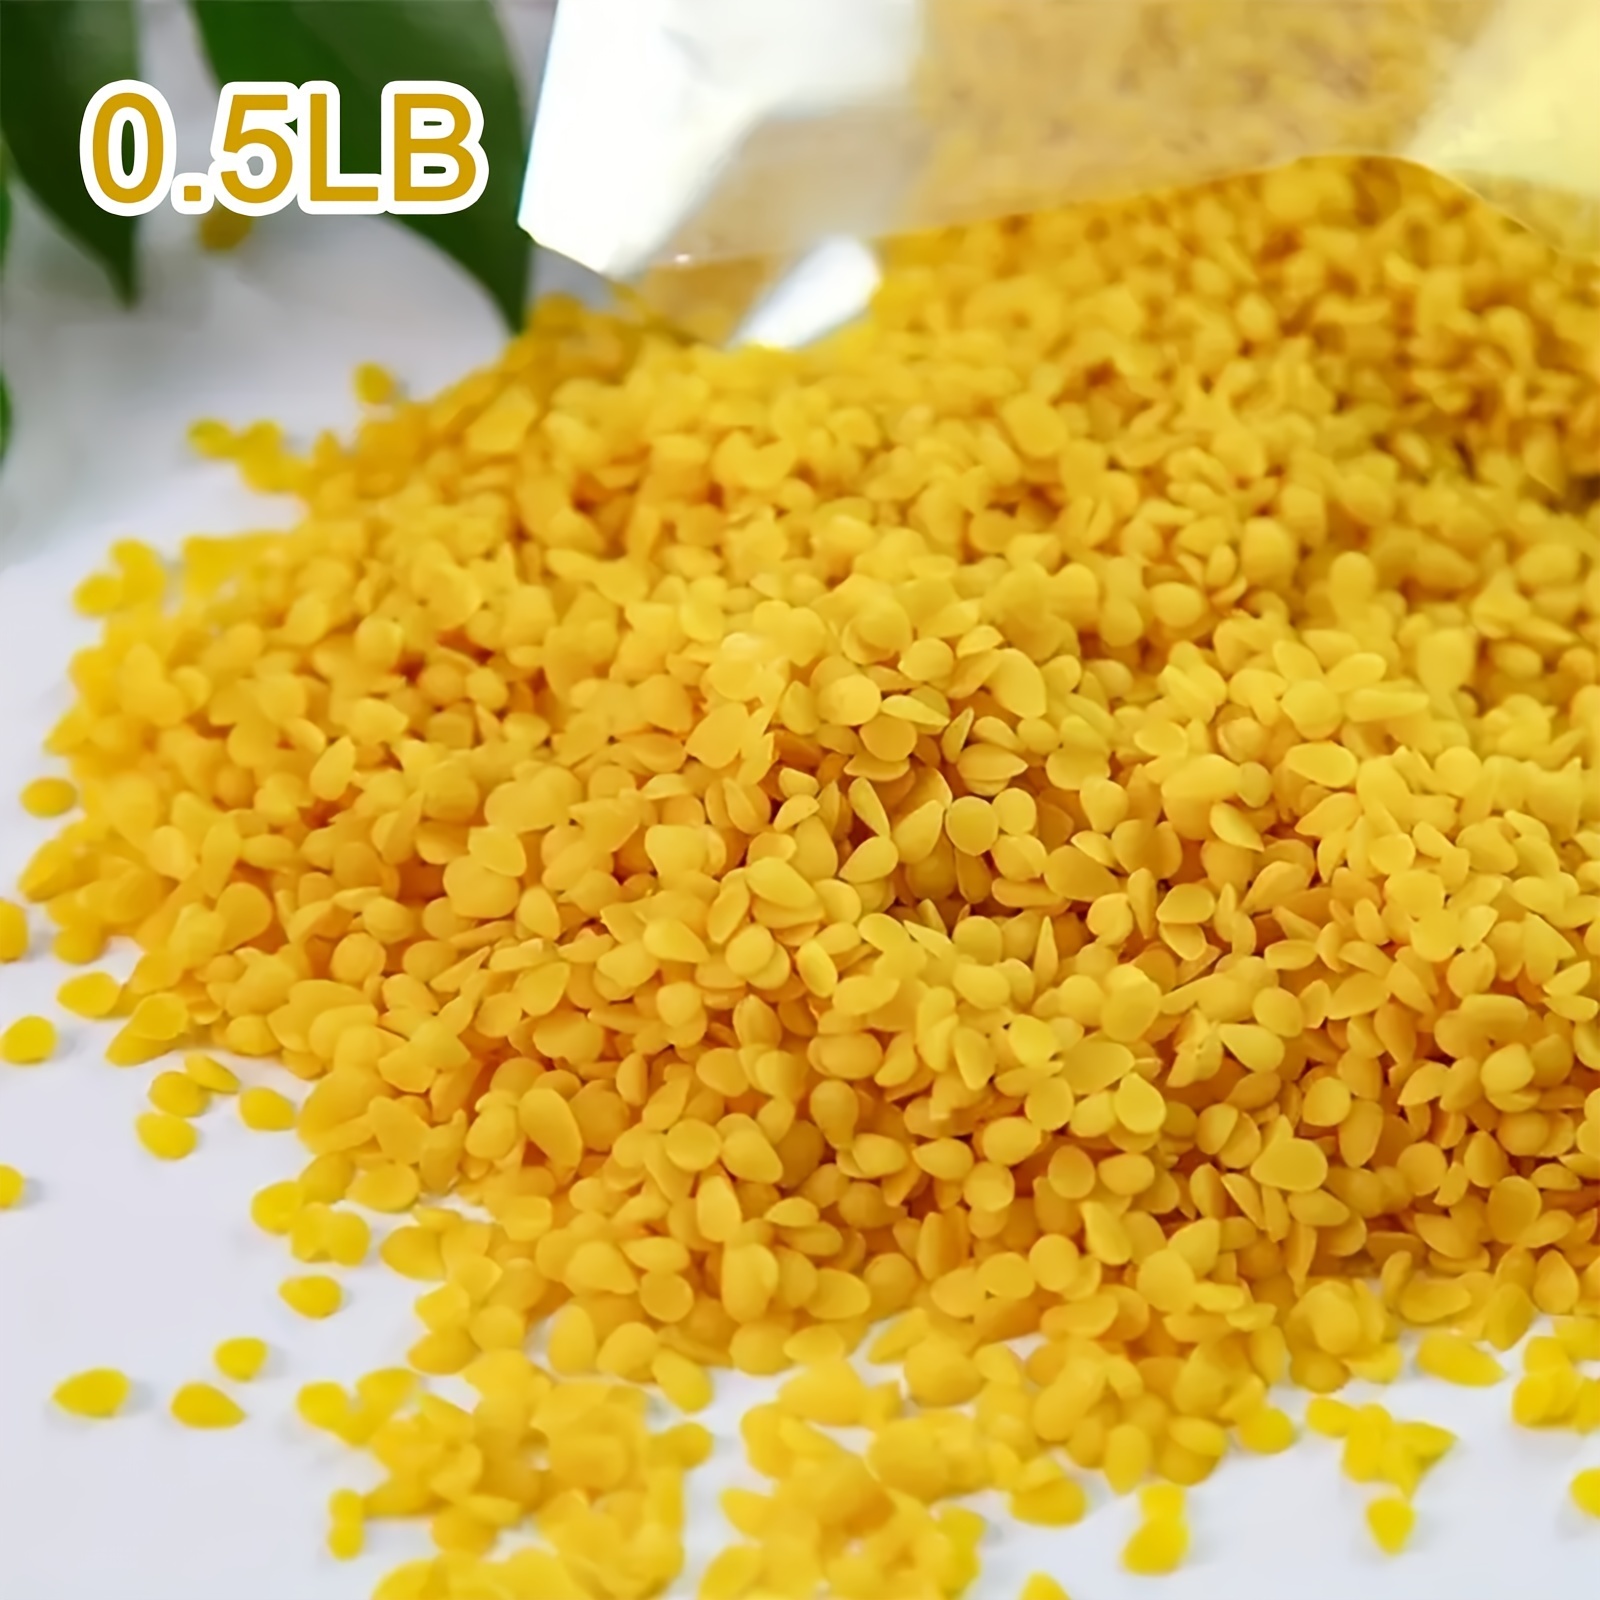 Organic Beeswax Pellets 2 lb (1 lb in Each Bag) Yellow, Pure, Cosmetic  Grade, Bees Wax Pastilles, Triple Filtered, Great for DIY Projects, Lip  Balms